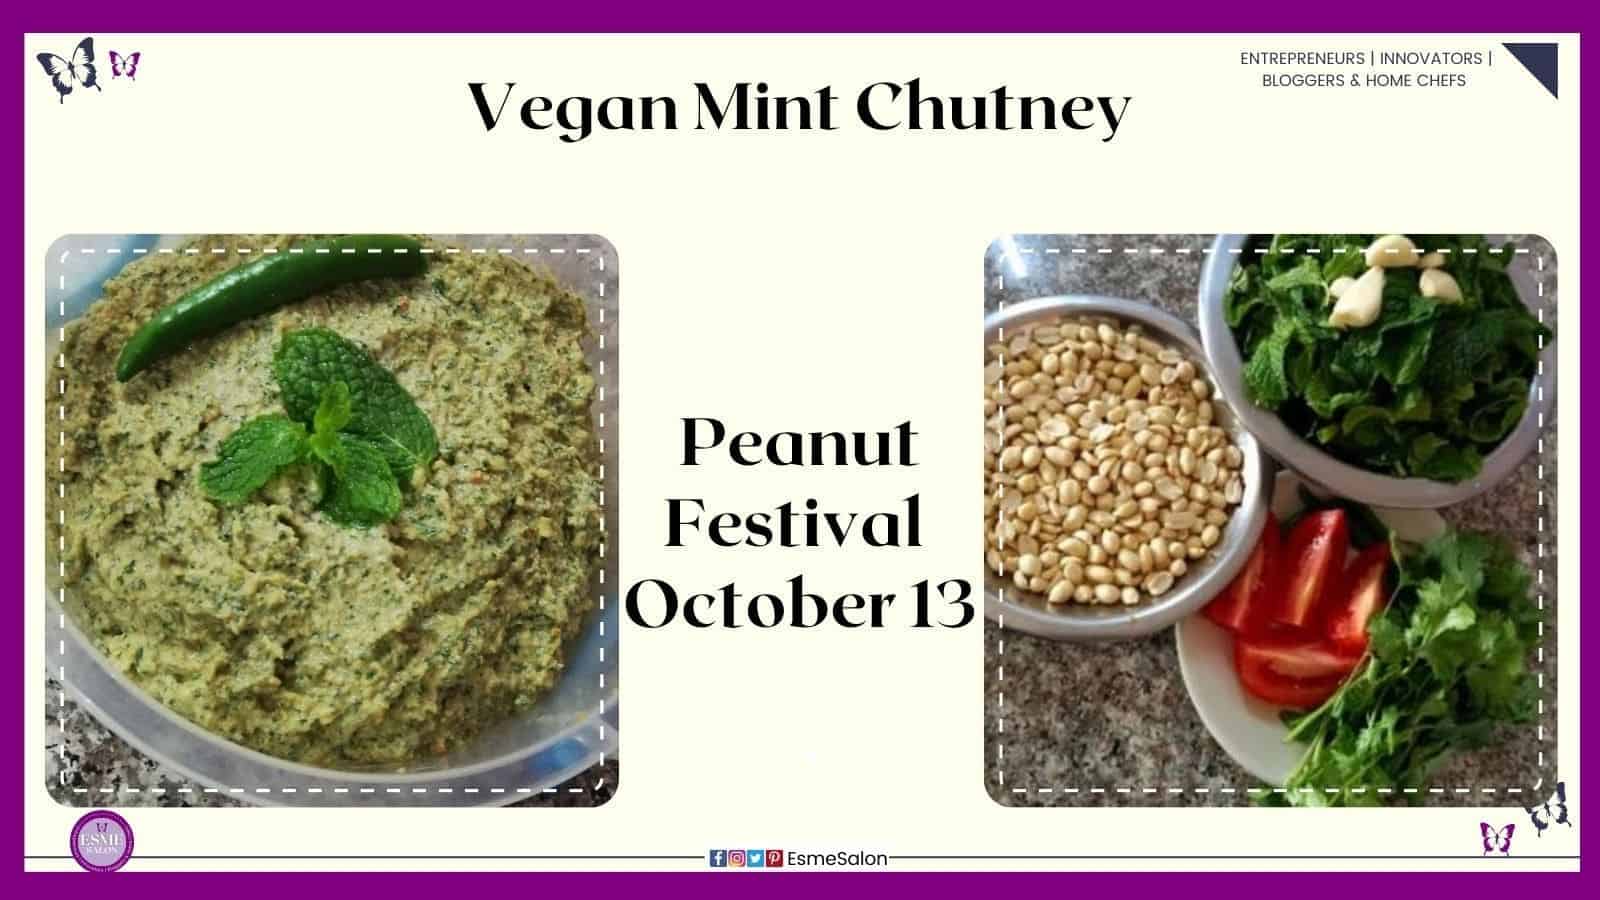 an image of a plastic contained with Vegan Mint Chutney with a chili and mint sprig and ingredients inclusive of peanuts